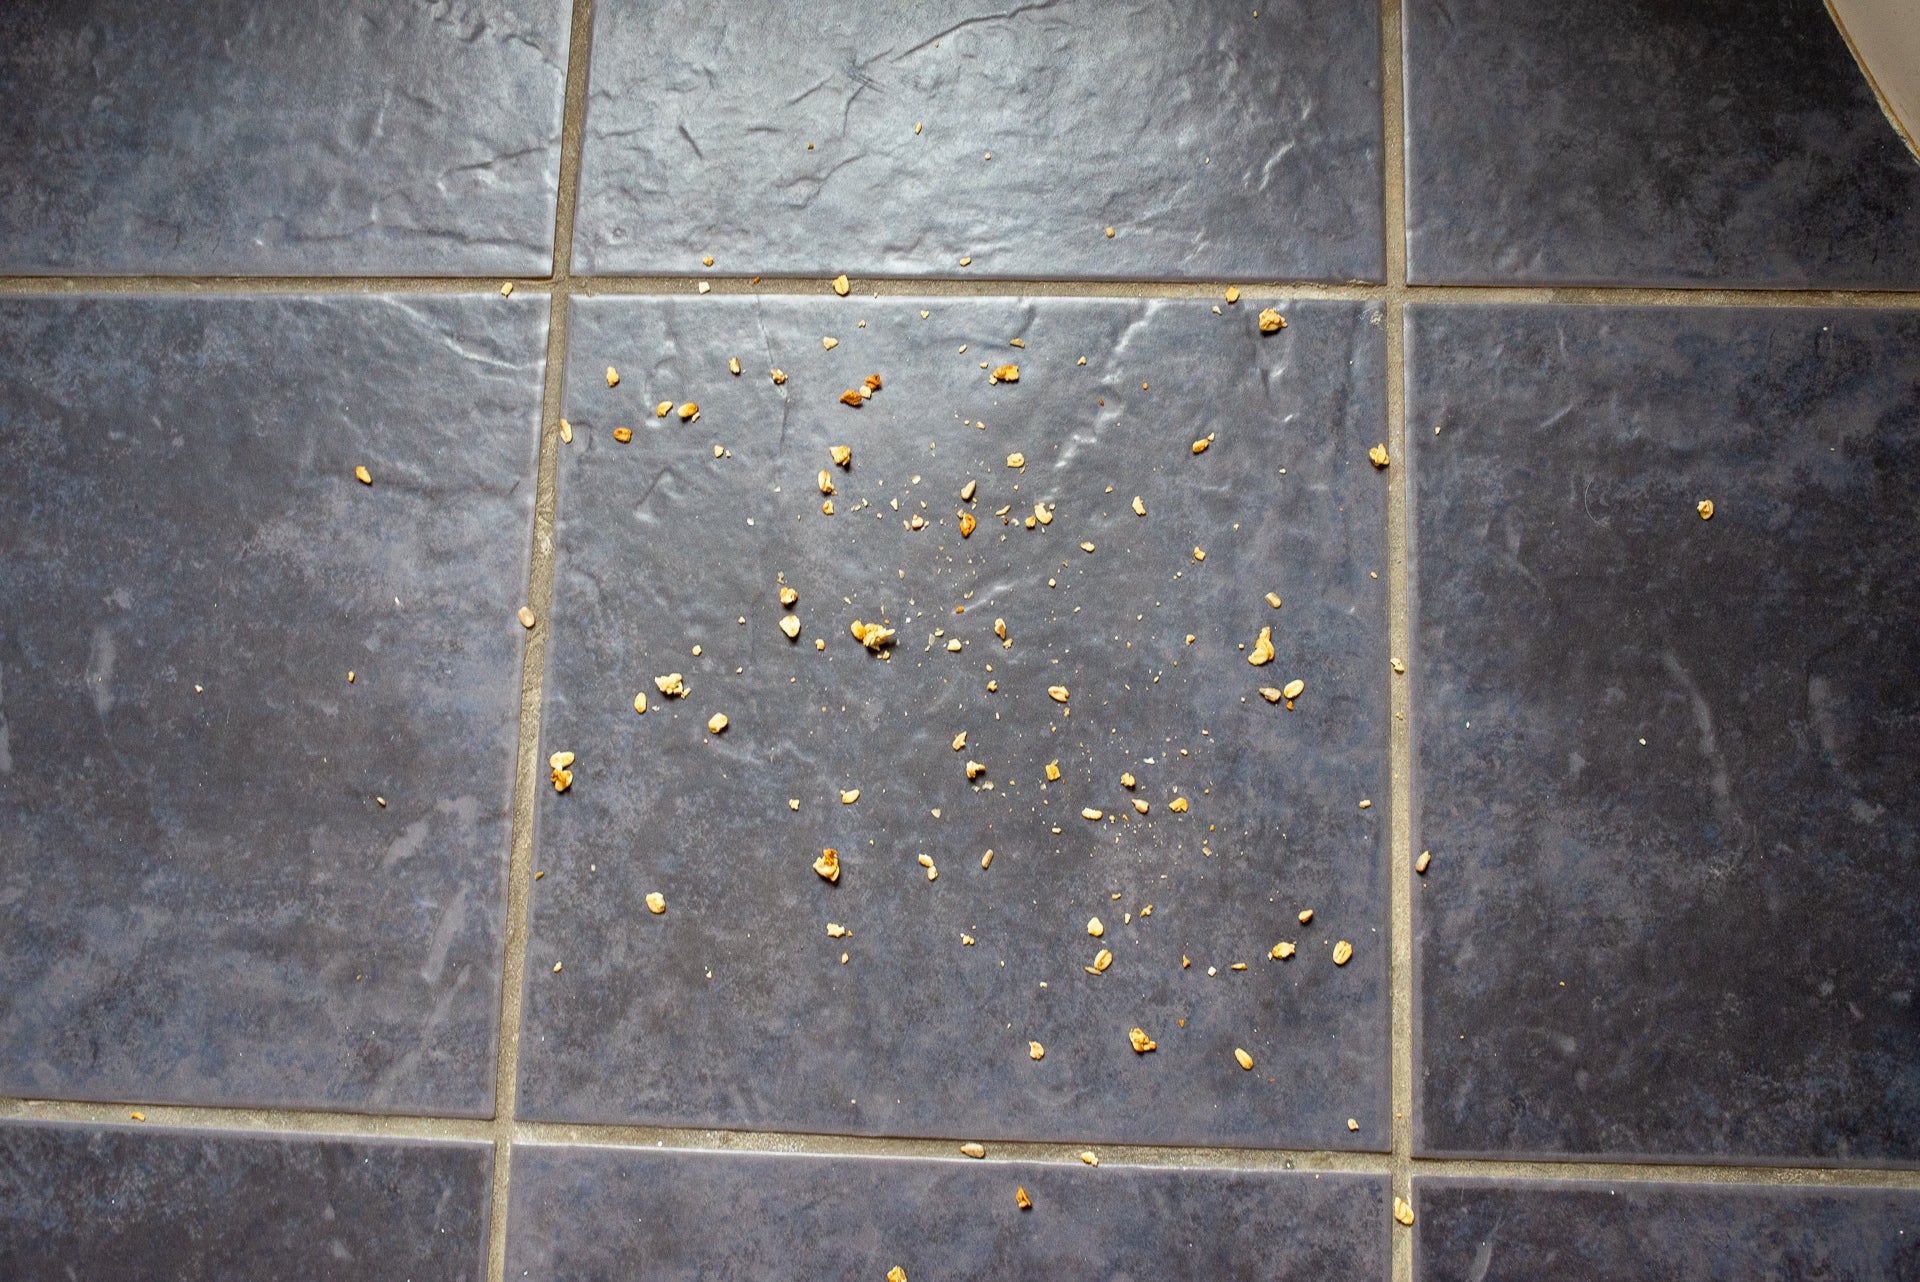 Tiled floor with scattered crumbs awaiting cleaning.